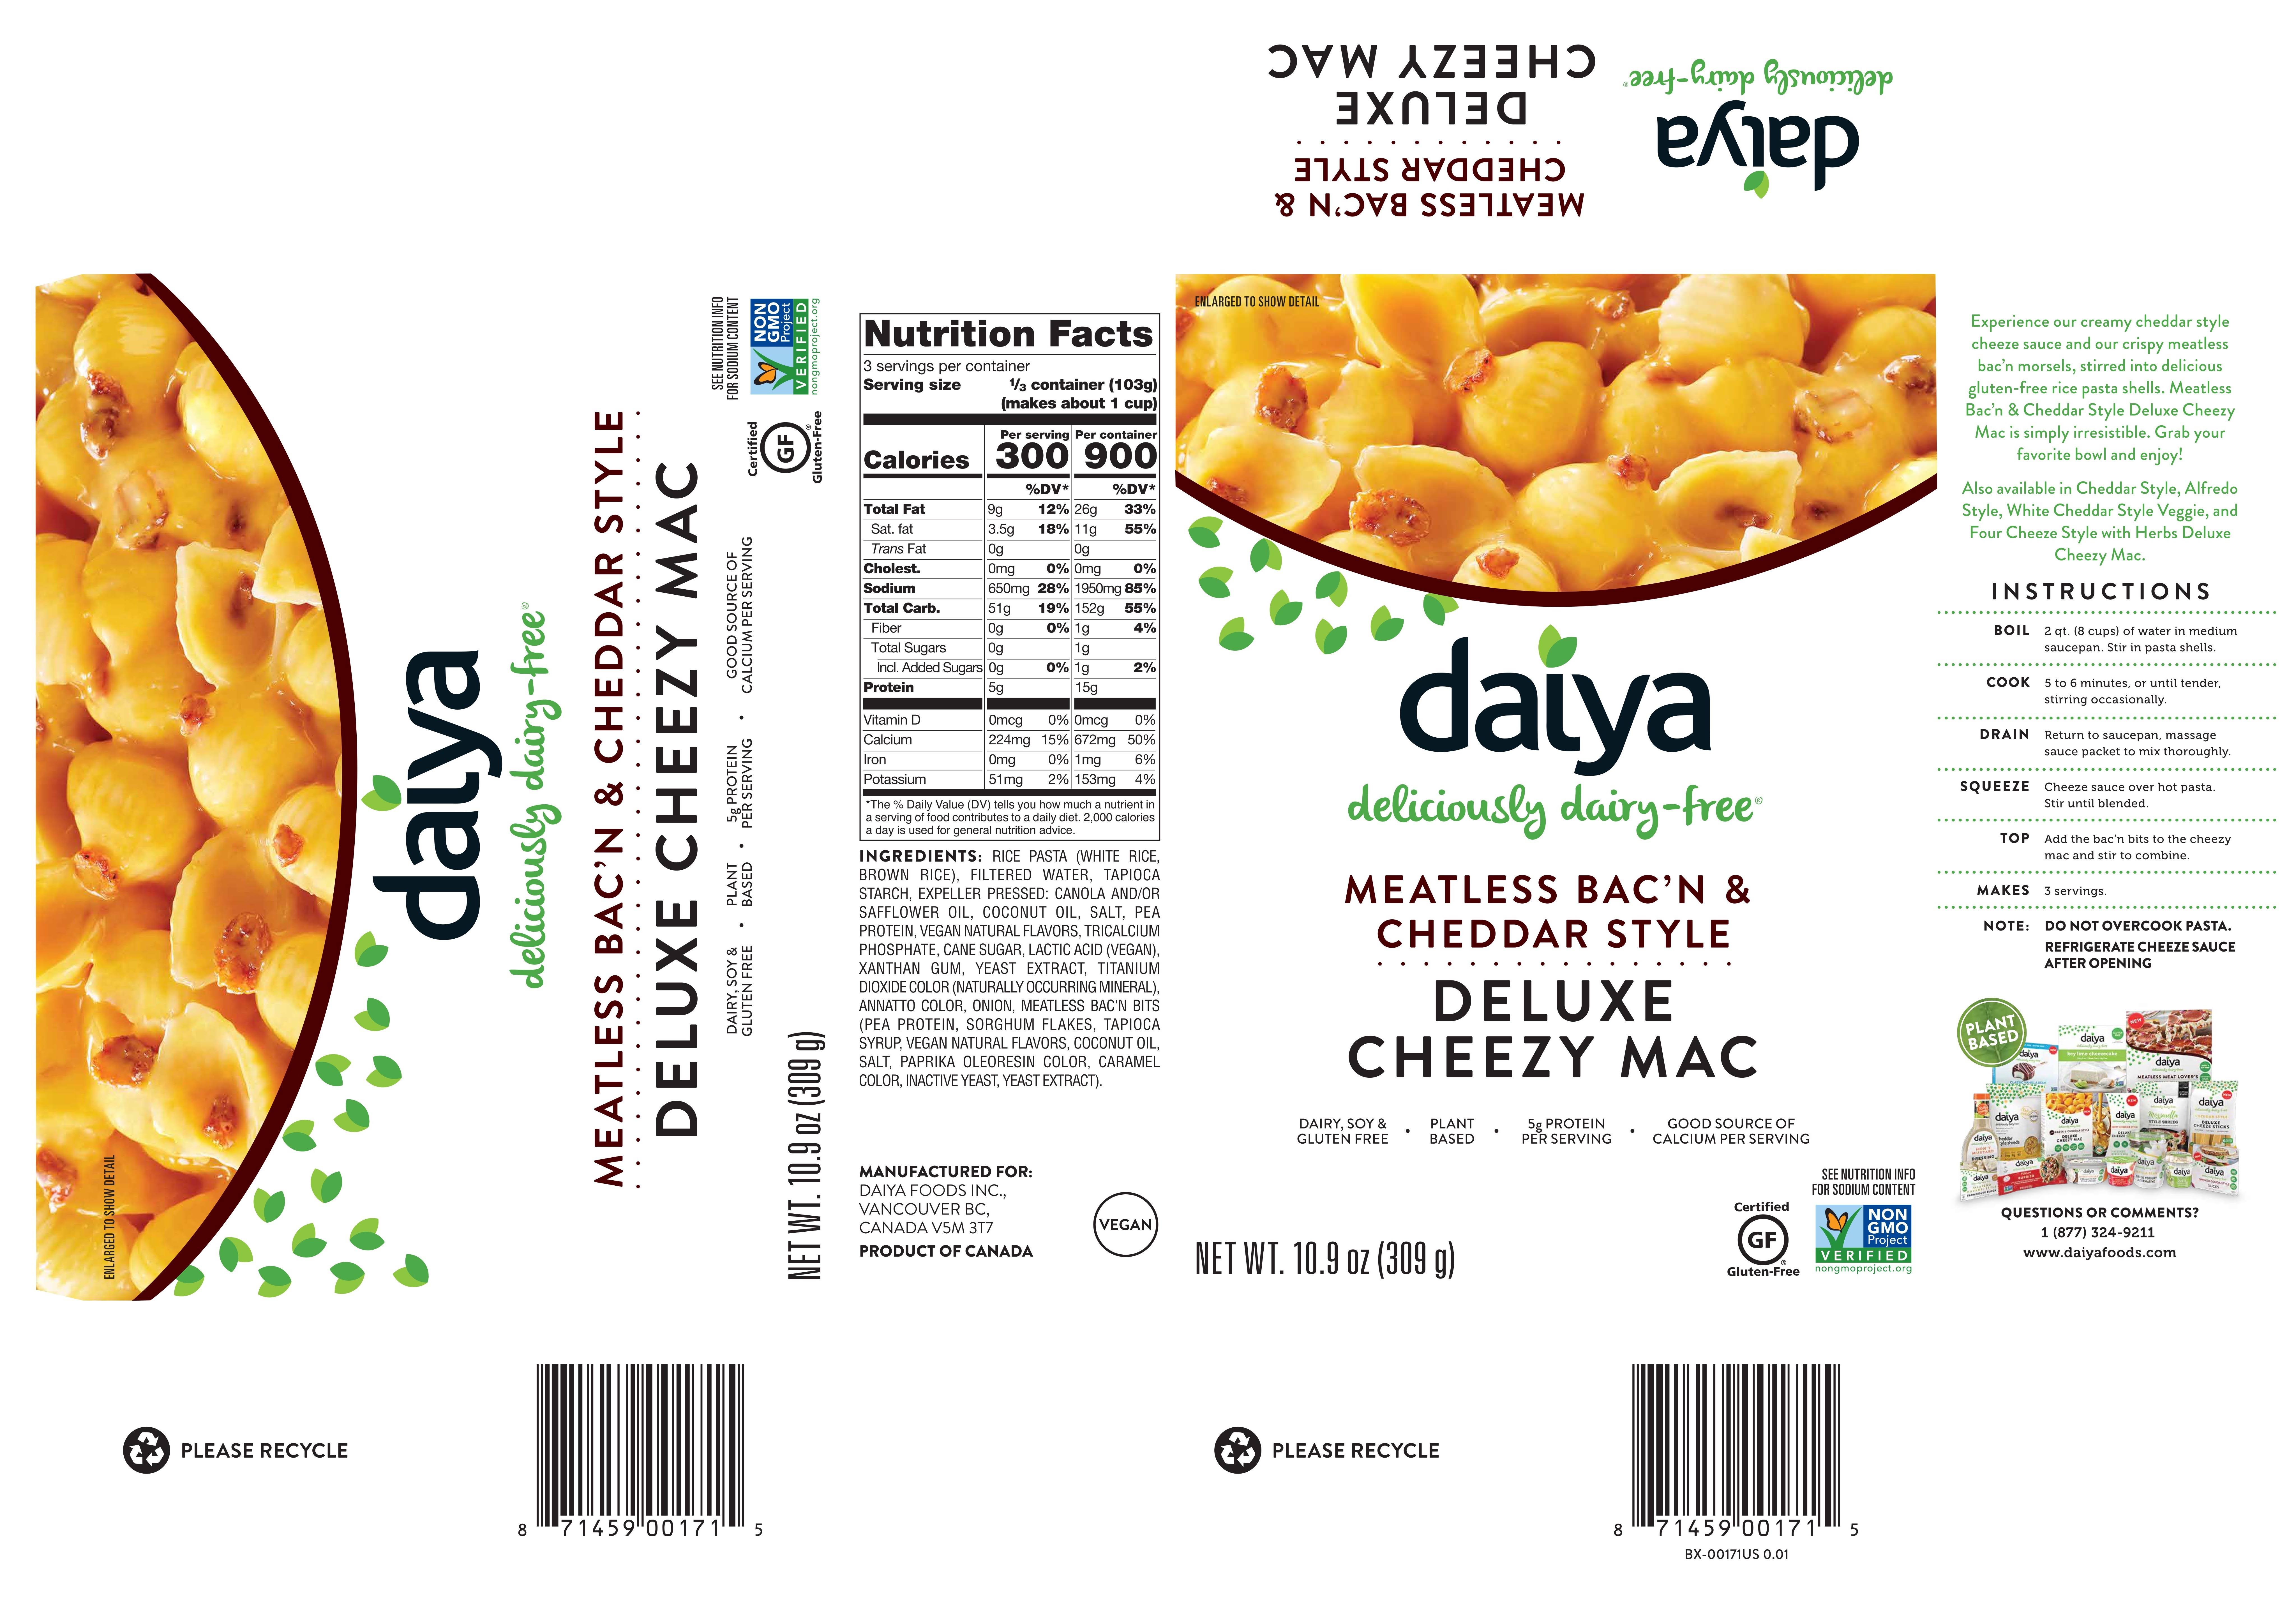 Daiya Meatless Bac'n and Cheddar Style Deluxe Cheezy Mac - Dairy Free